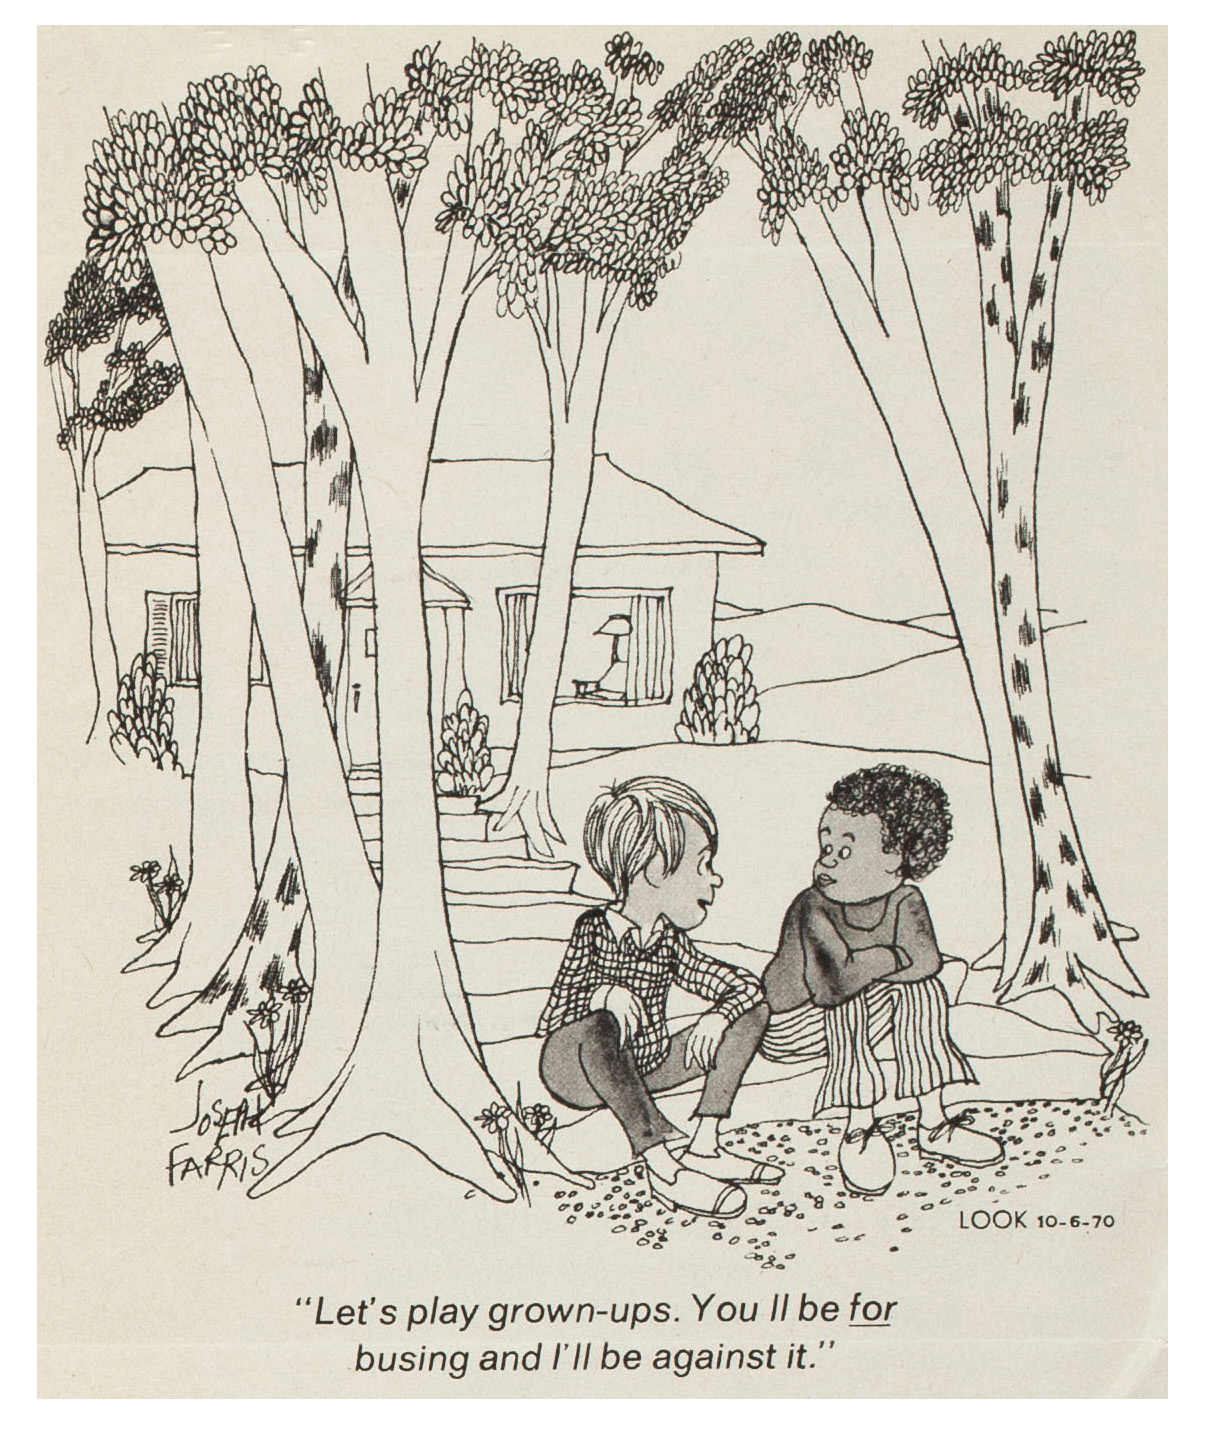 Cartoon of two children playing outside "Let's play grown-ups. You'll be for busing and I'll be against it."